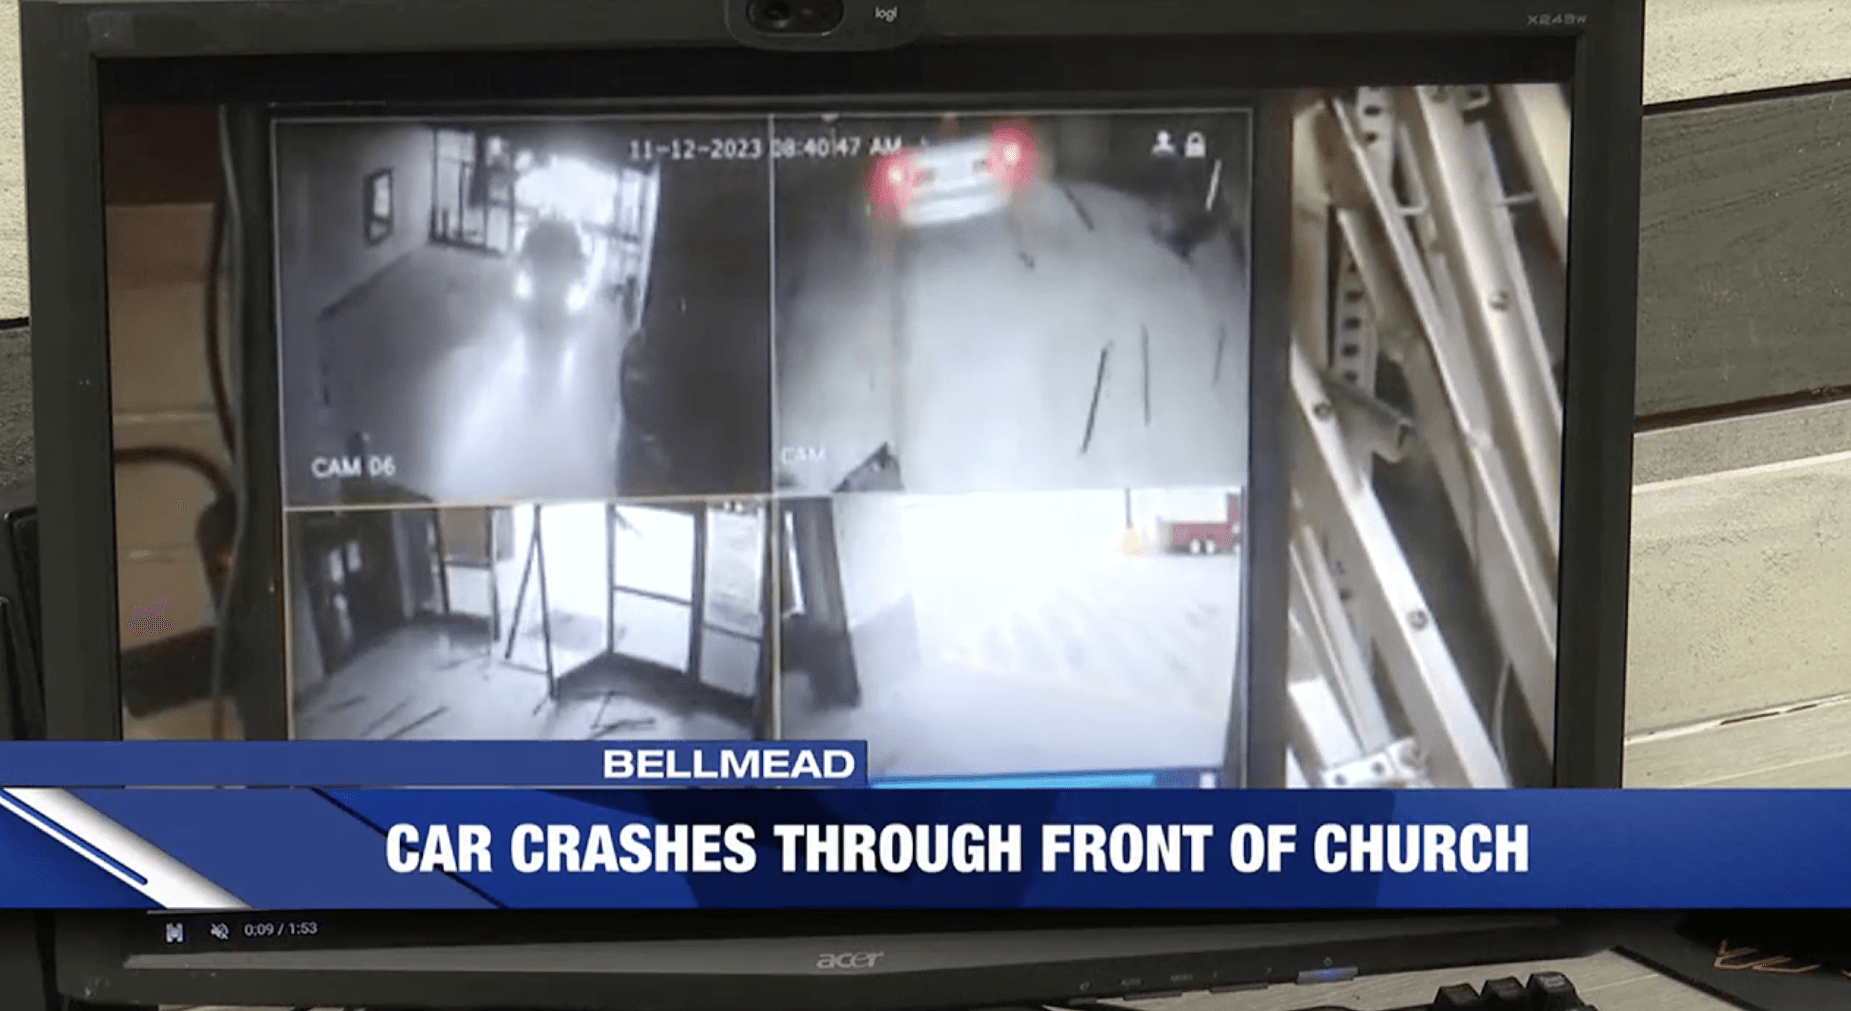 ‘I’m thankful nobody was here’: Bellmead pastor shares footage of car crashing through front door